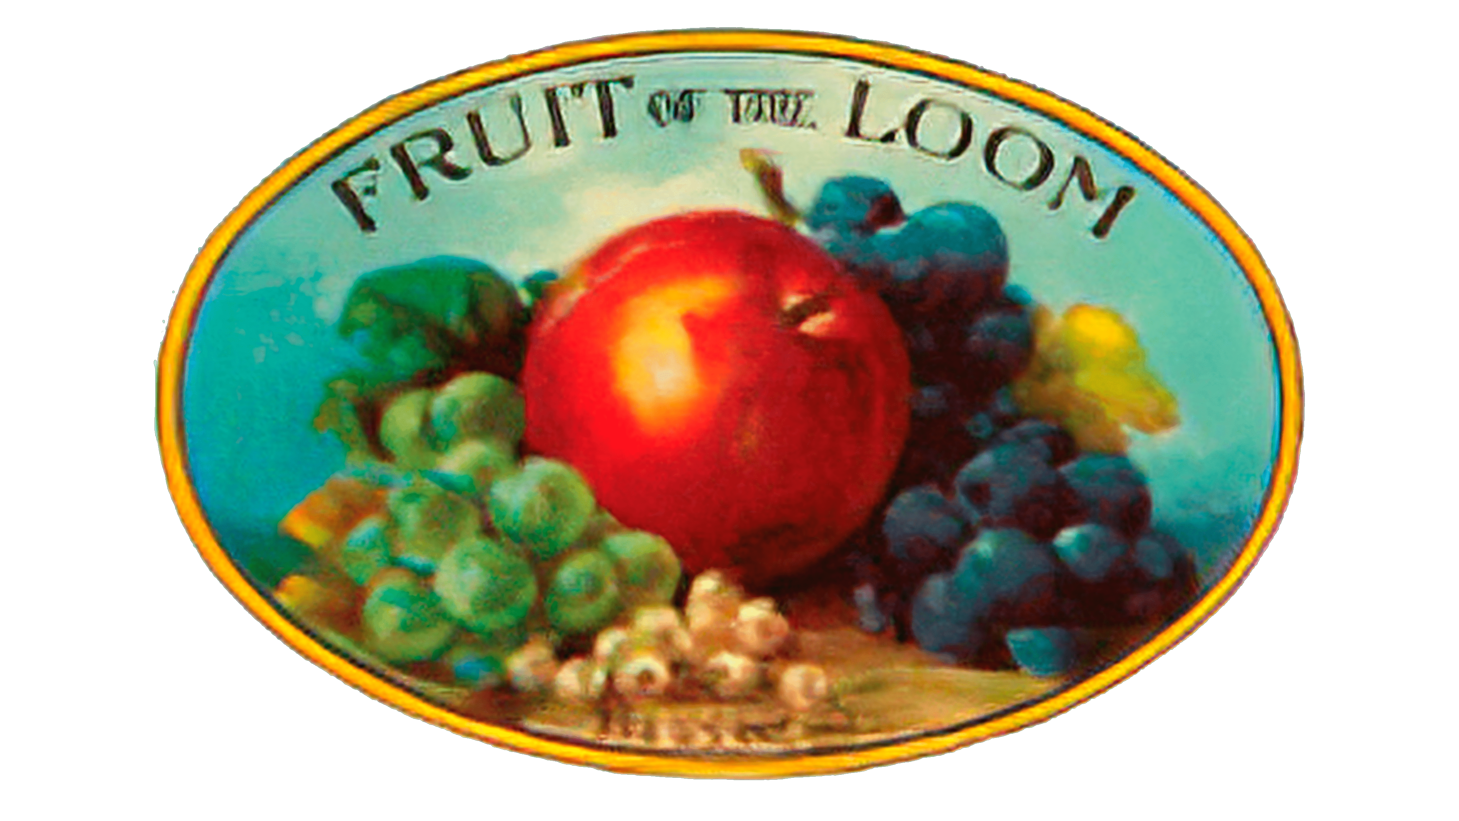 Fruit of the loom sign 1927 1936